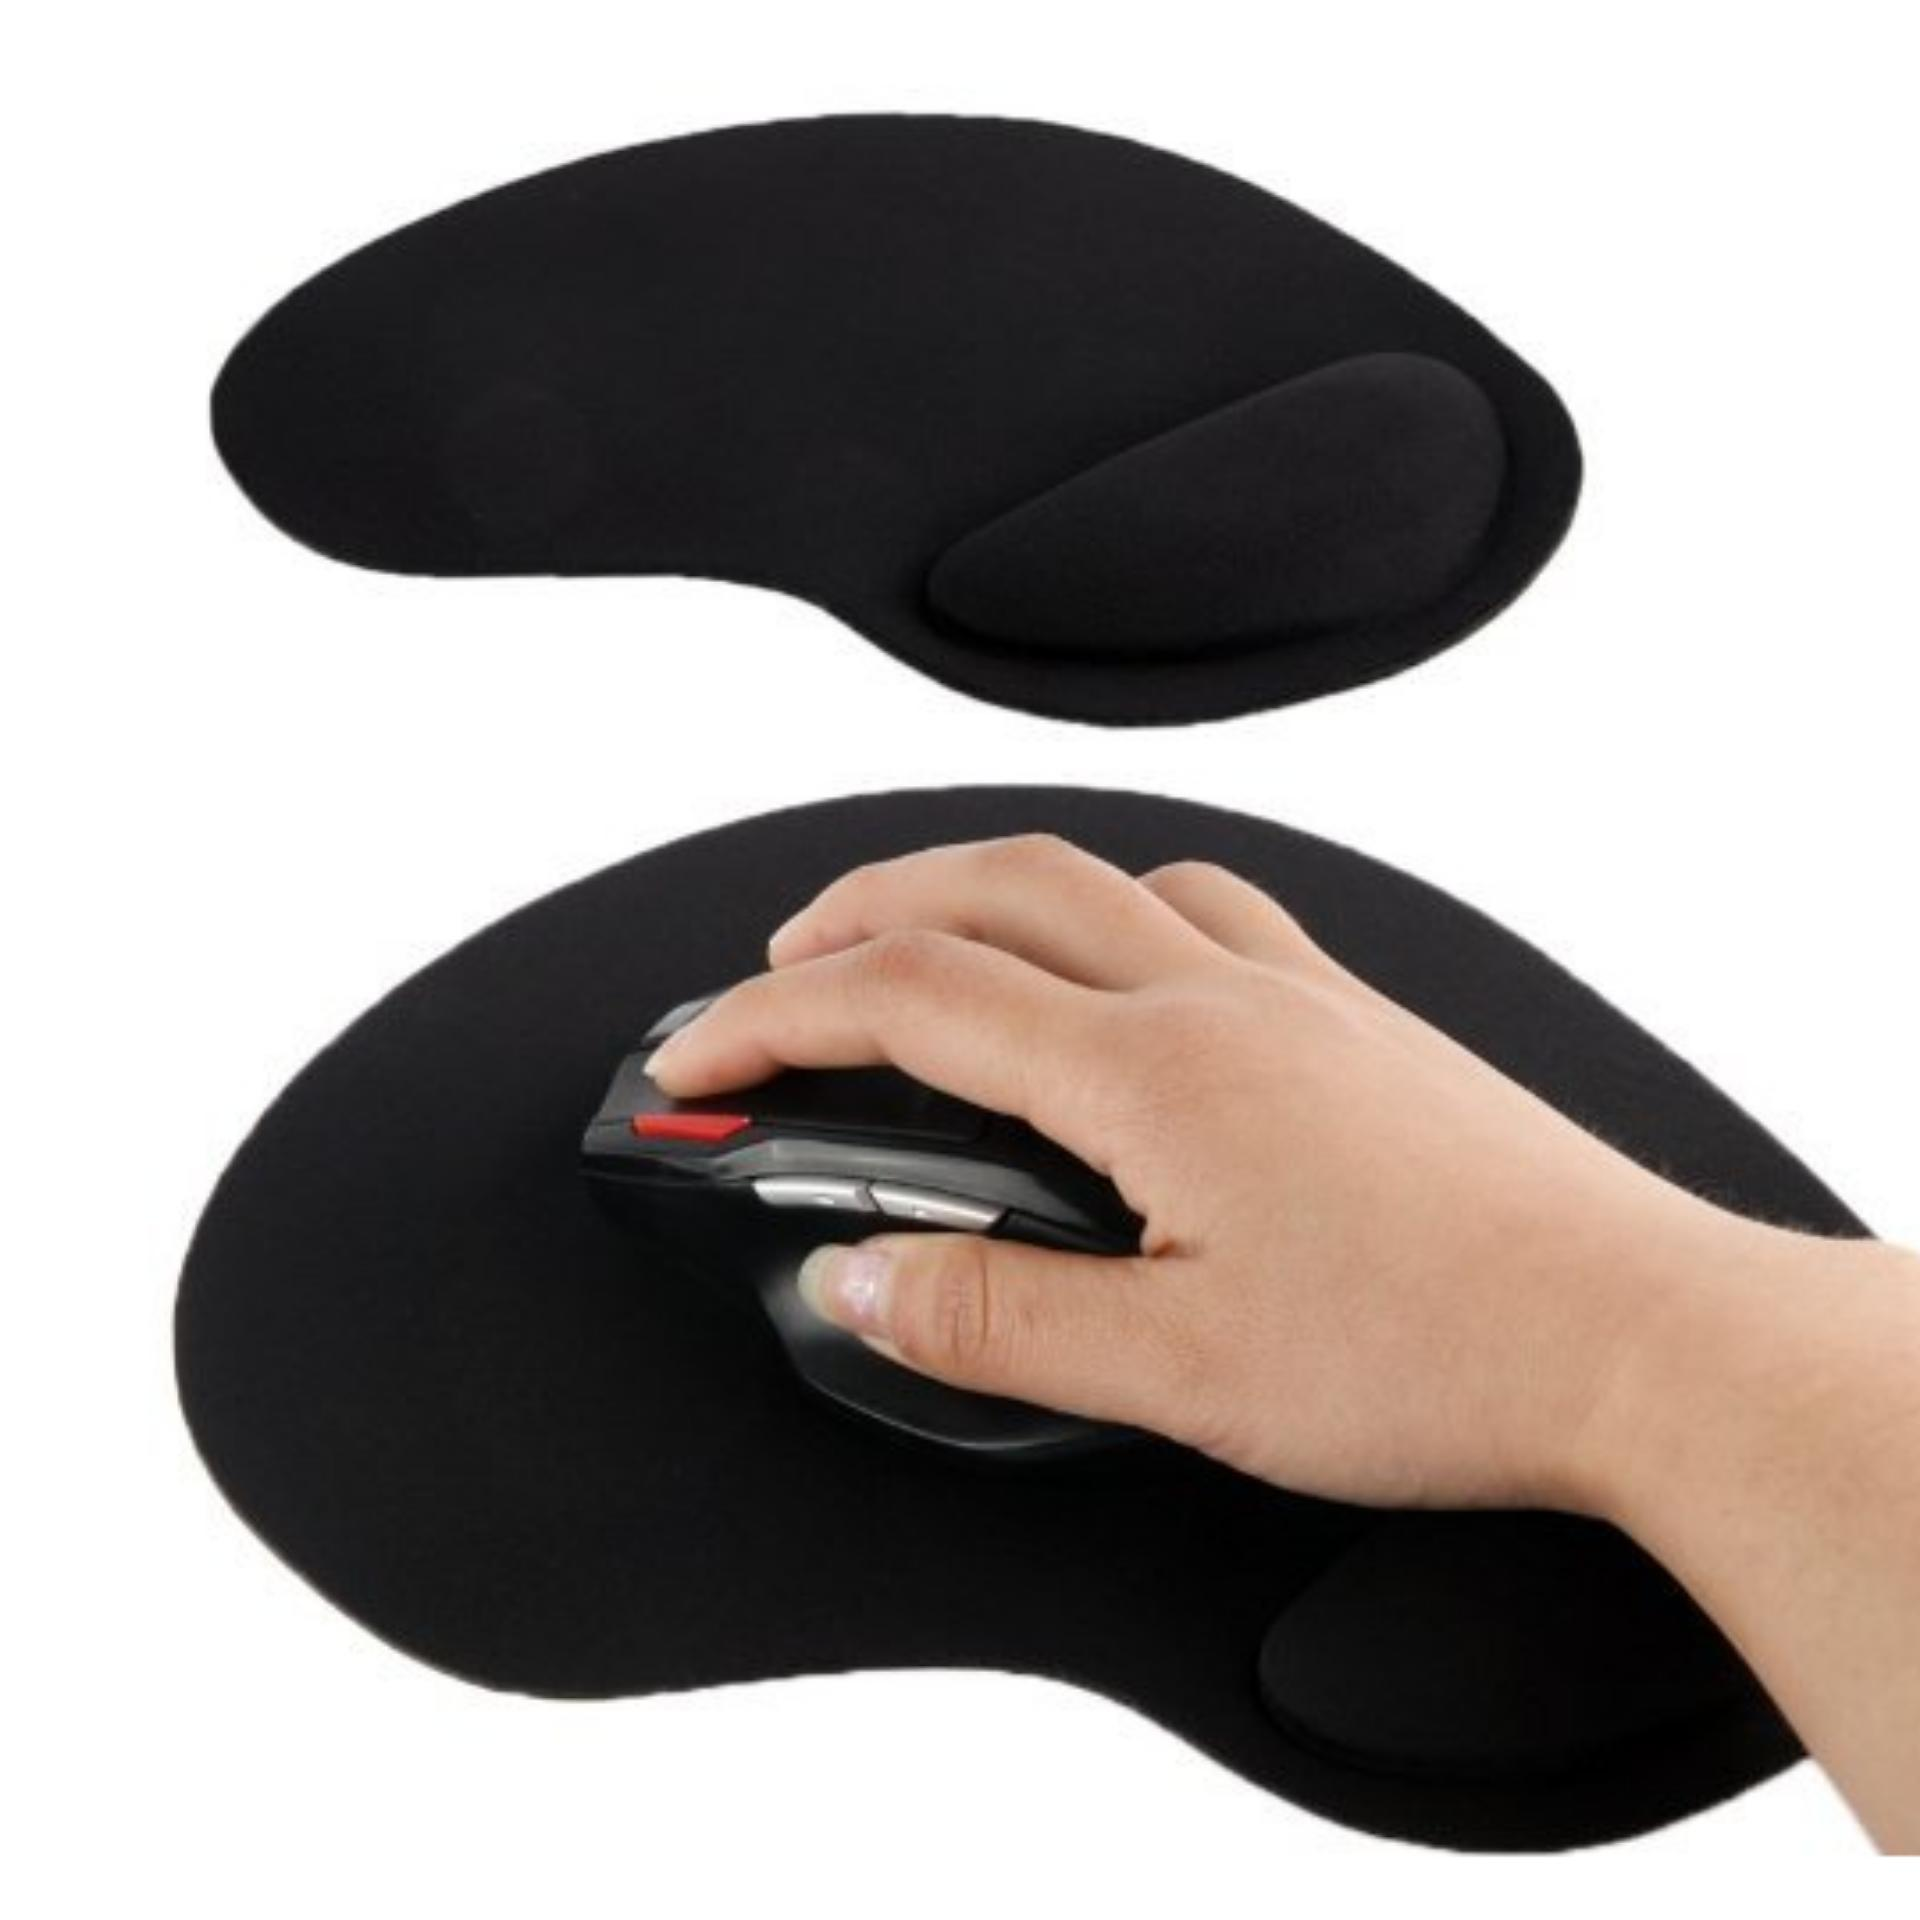 Office GIM Mouse pad Gaming Memory Foam Mouse Wrist Rest Support Cushion with Non Slip Rubber Base for Laptop Computer 